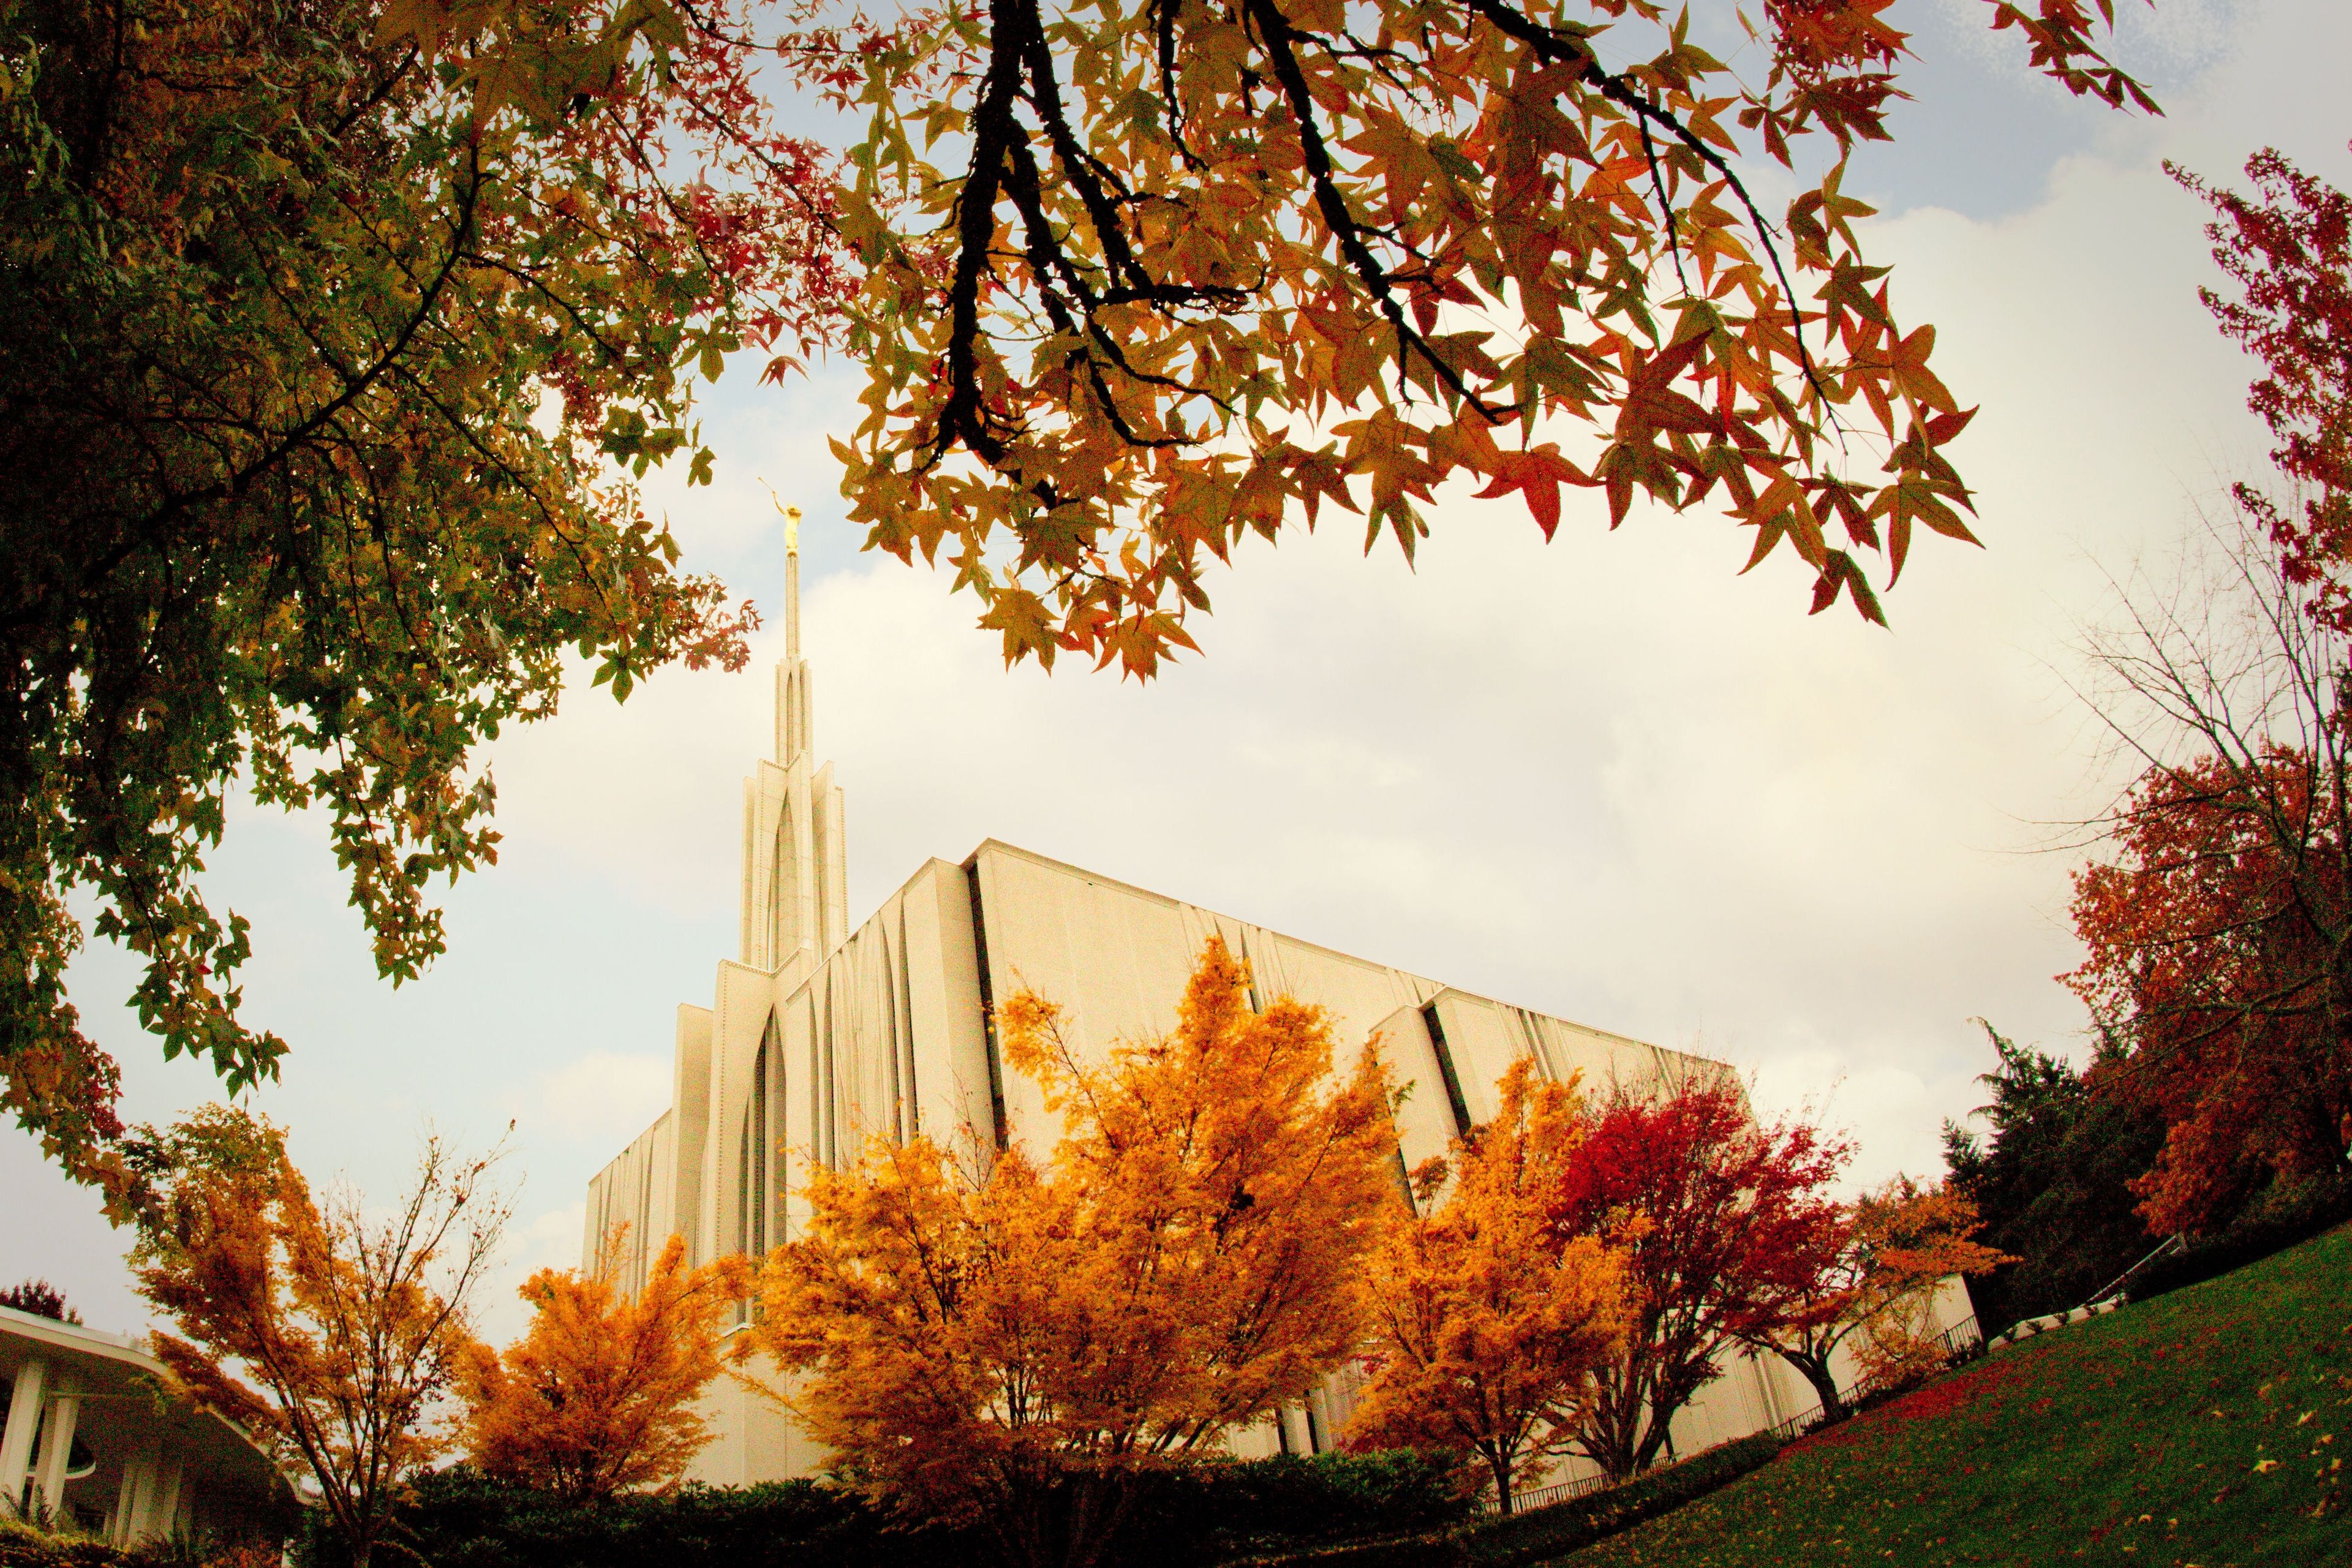 A side view of the Seattle Washington Temple in the fall, including the spire and scenery.